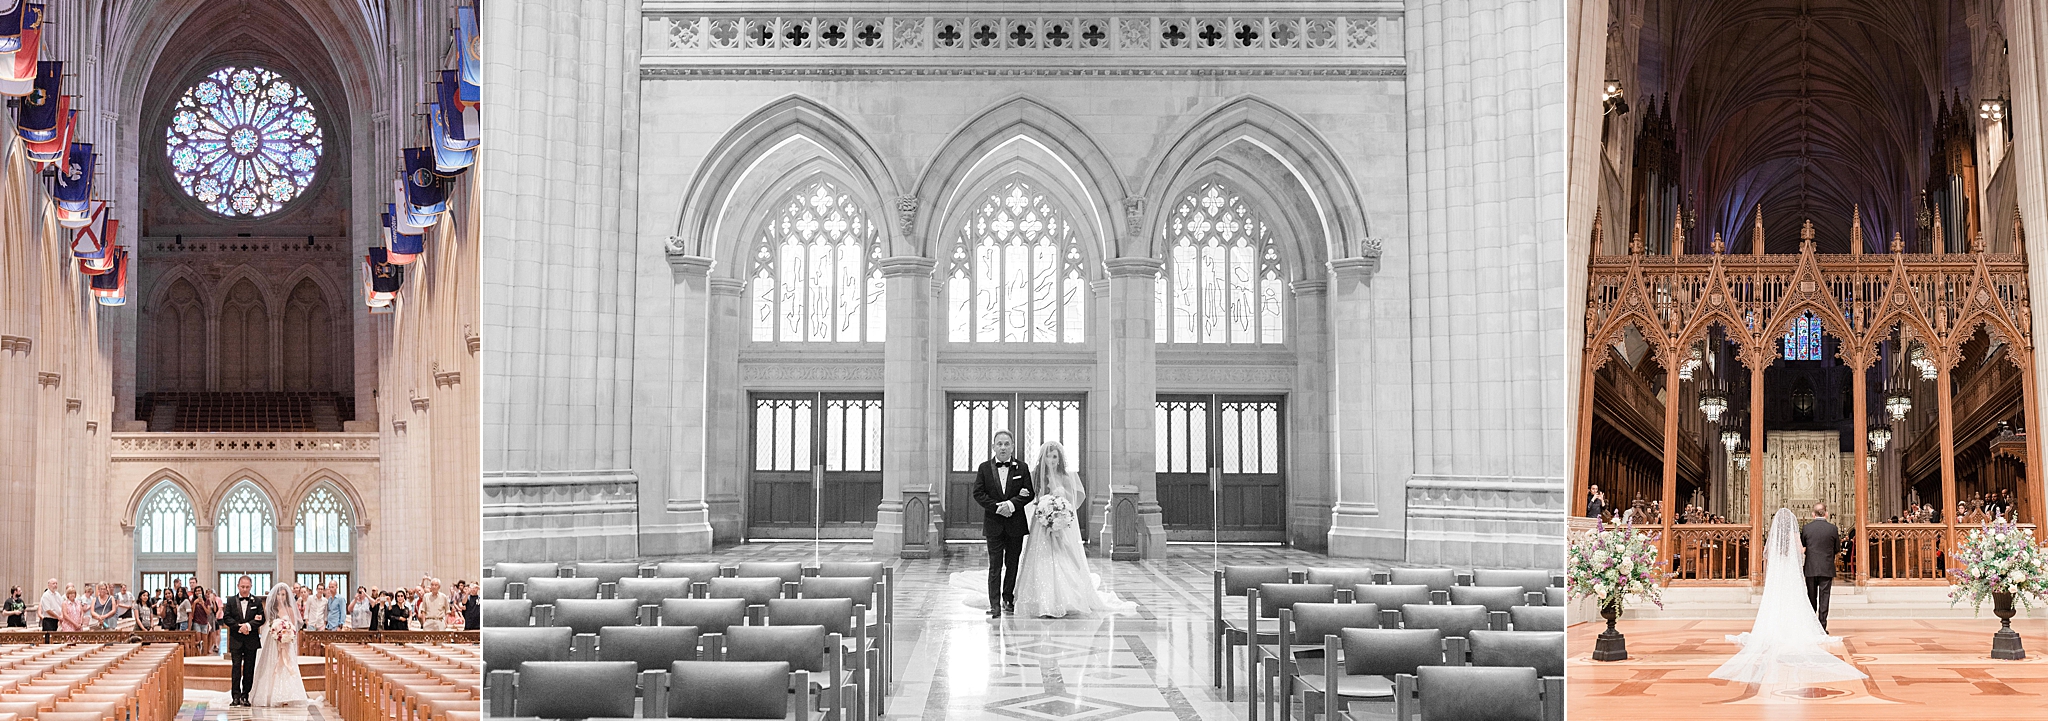 Wedding Photos at the National Cathedral in Washington, DC